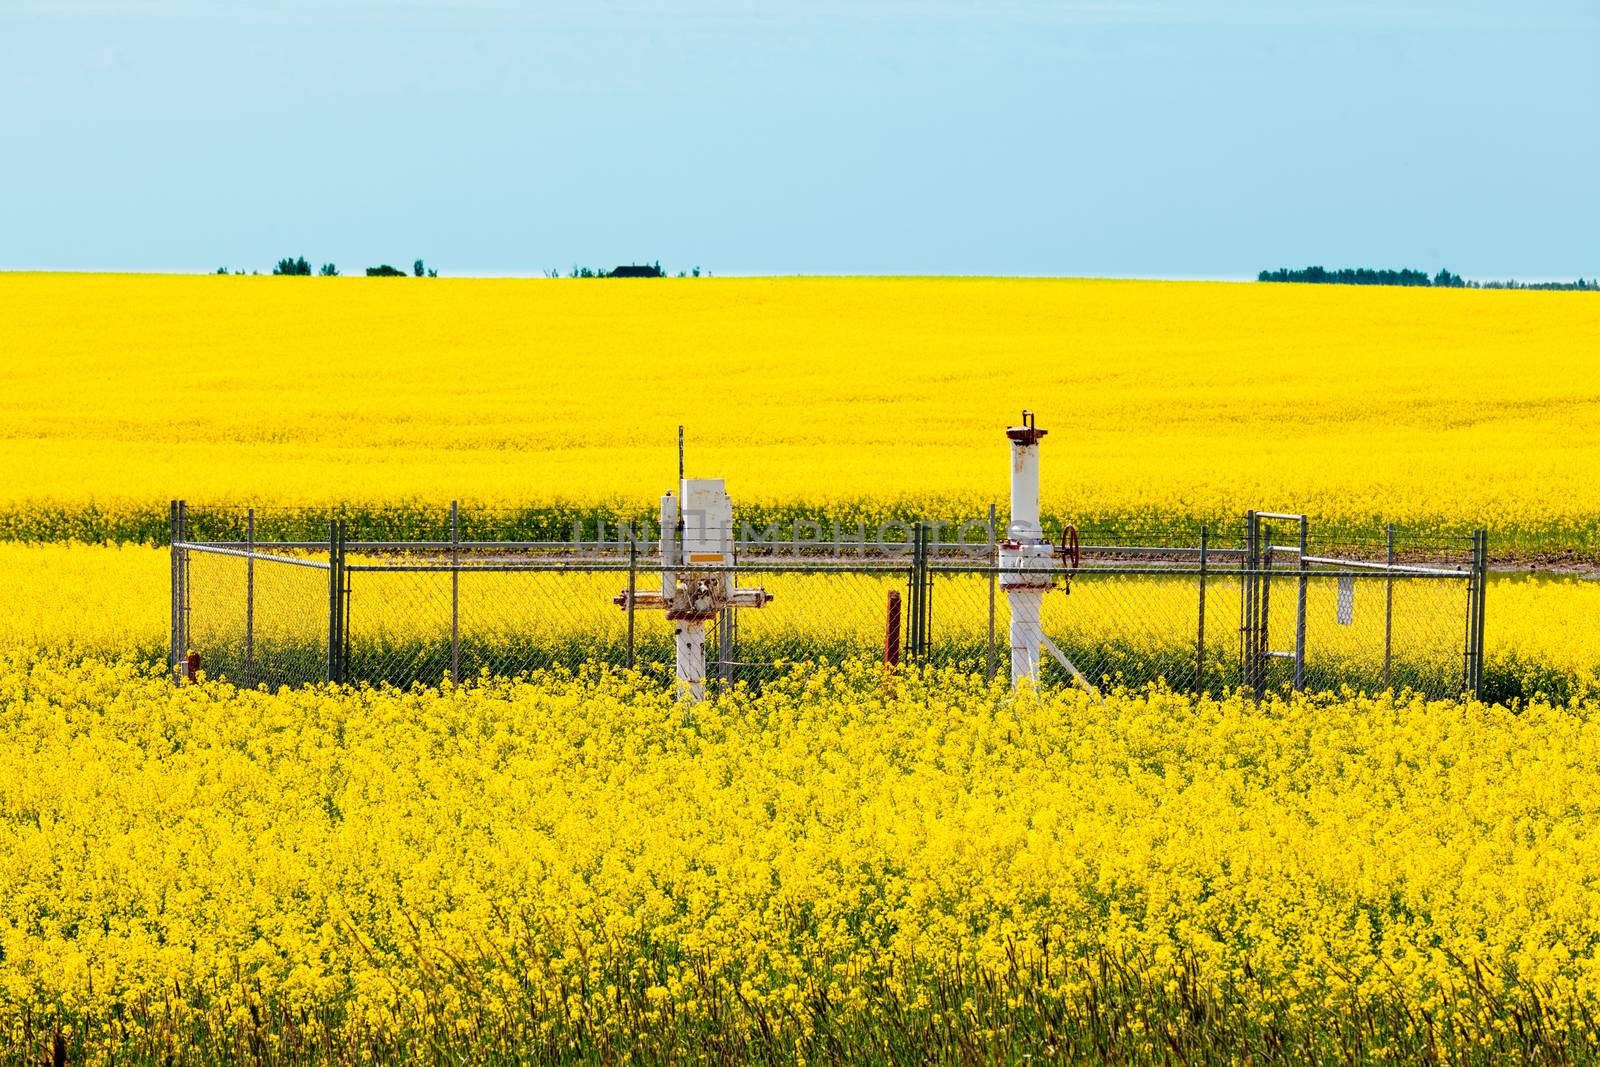 Natural gas wellheads in yellow blooming canola rapeseed field agricultural farmland in Alberta, Canada